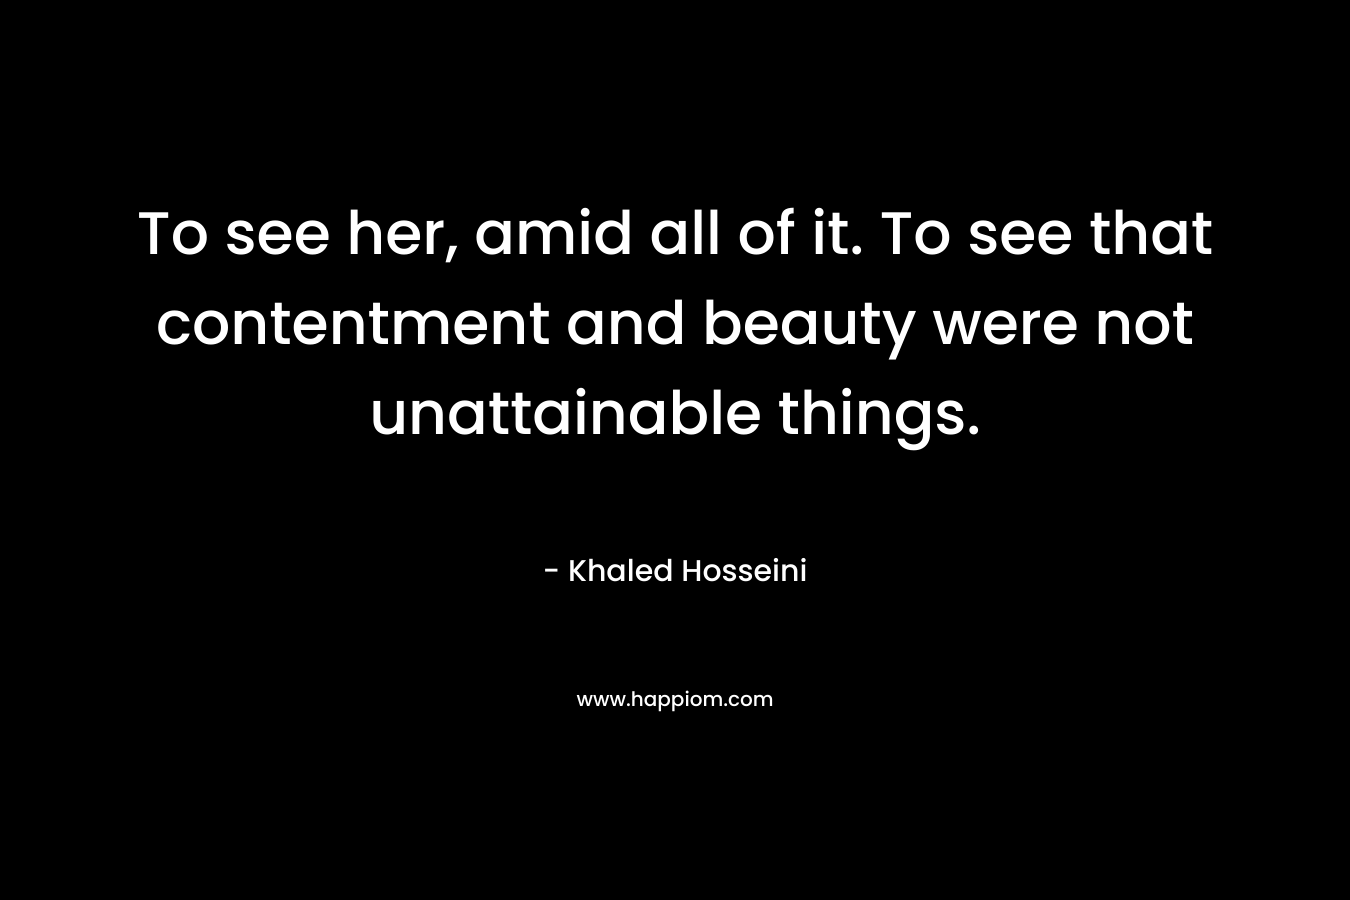 To see her, amid all of it. To see that contentment and beauty were not unattainable things. – Khaled Hosseini